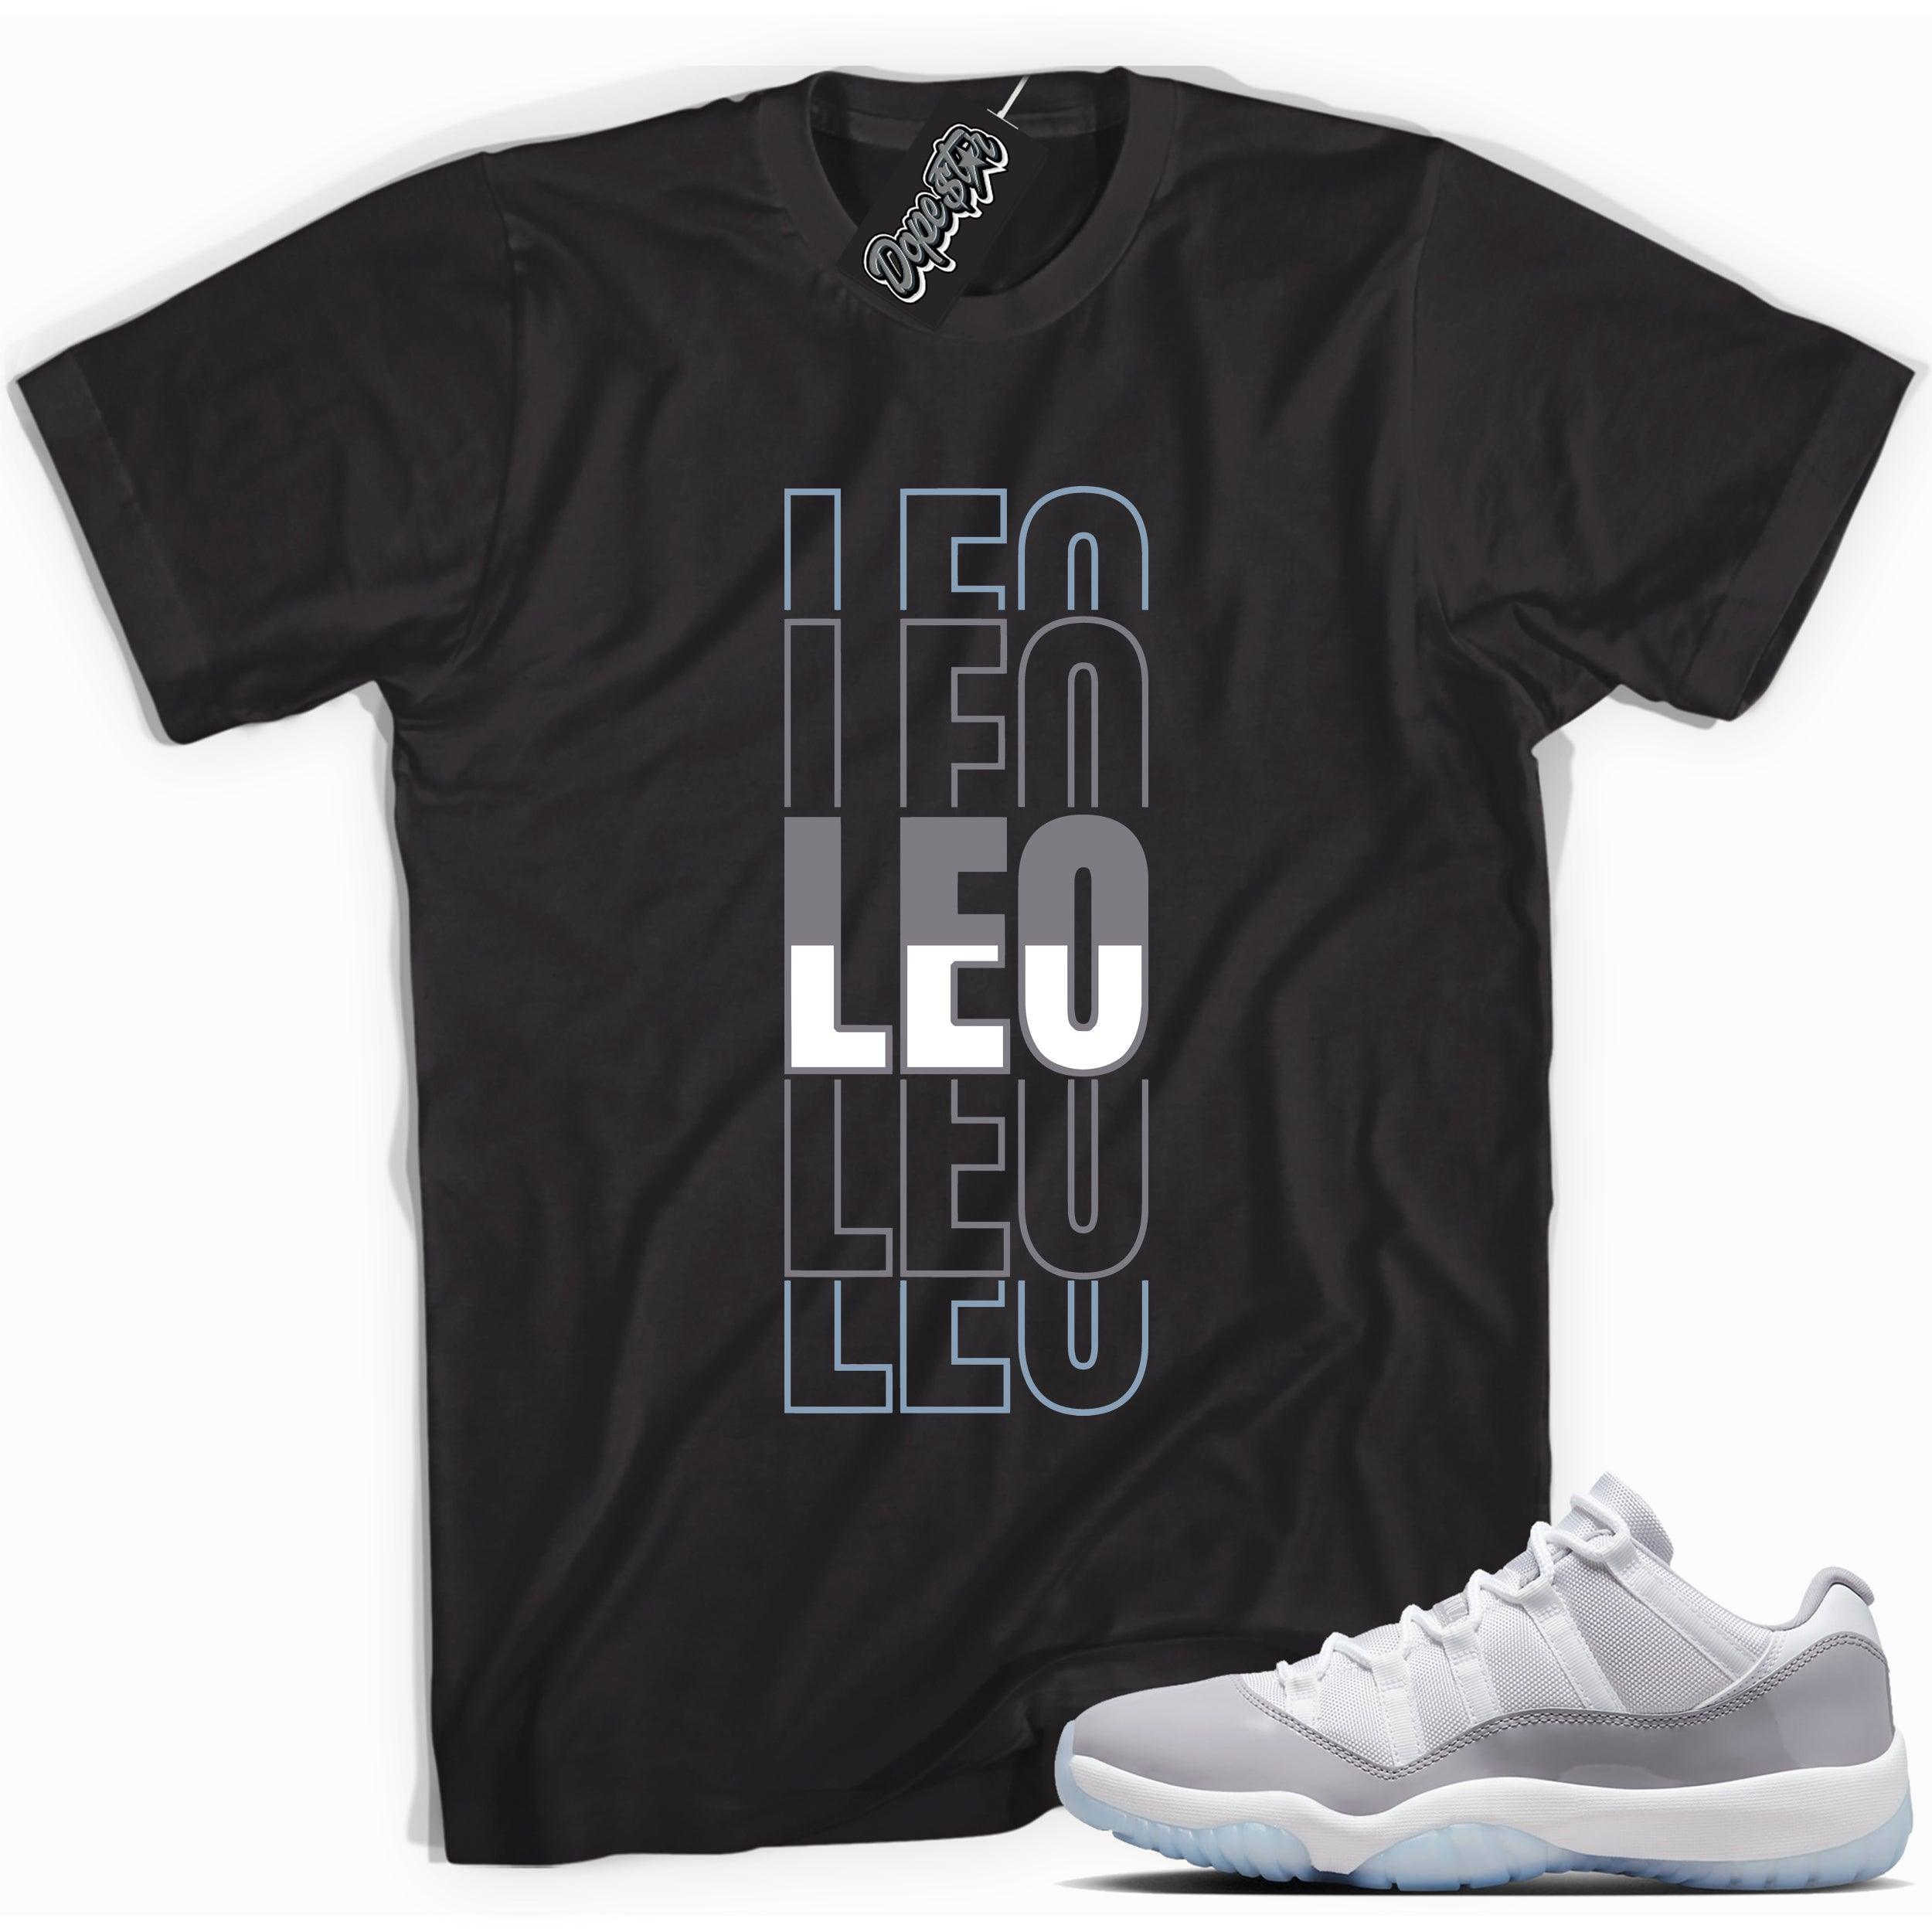 Cool Black graphic tee with “ LEO ” print, that perfectly matches Air Jordan 11 Retro Low Cement Grey sneakers